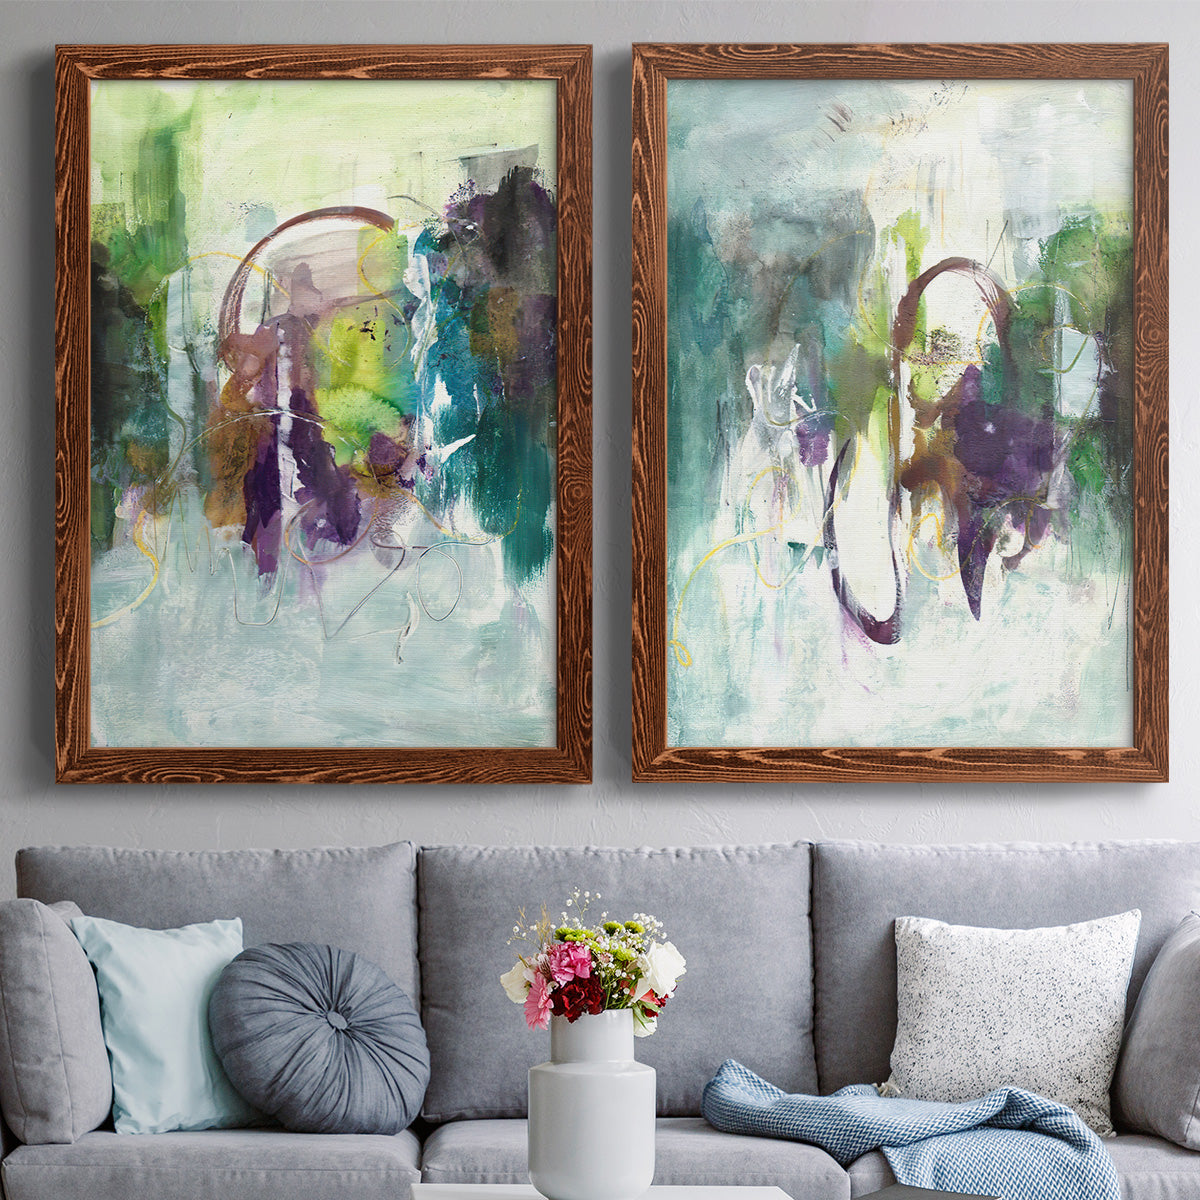 Moving On I - Premium Framed Canvas 2 Piece Set - Ready to Hang